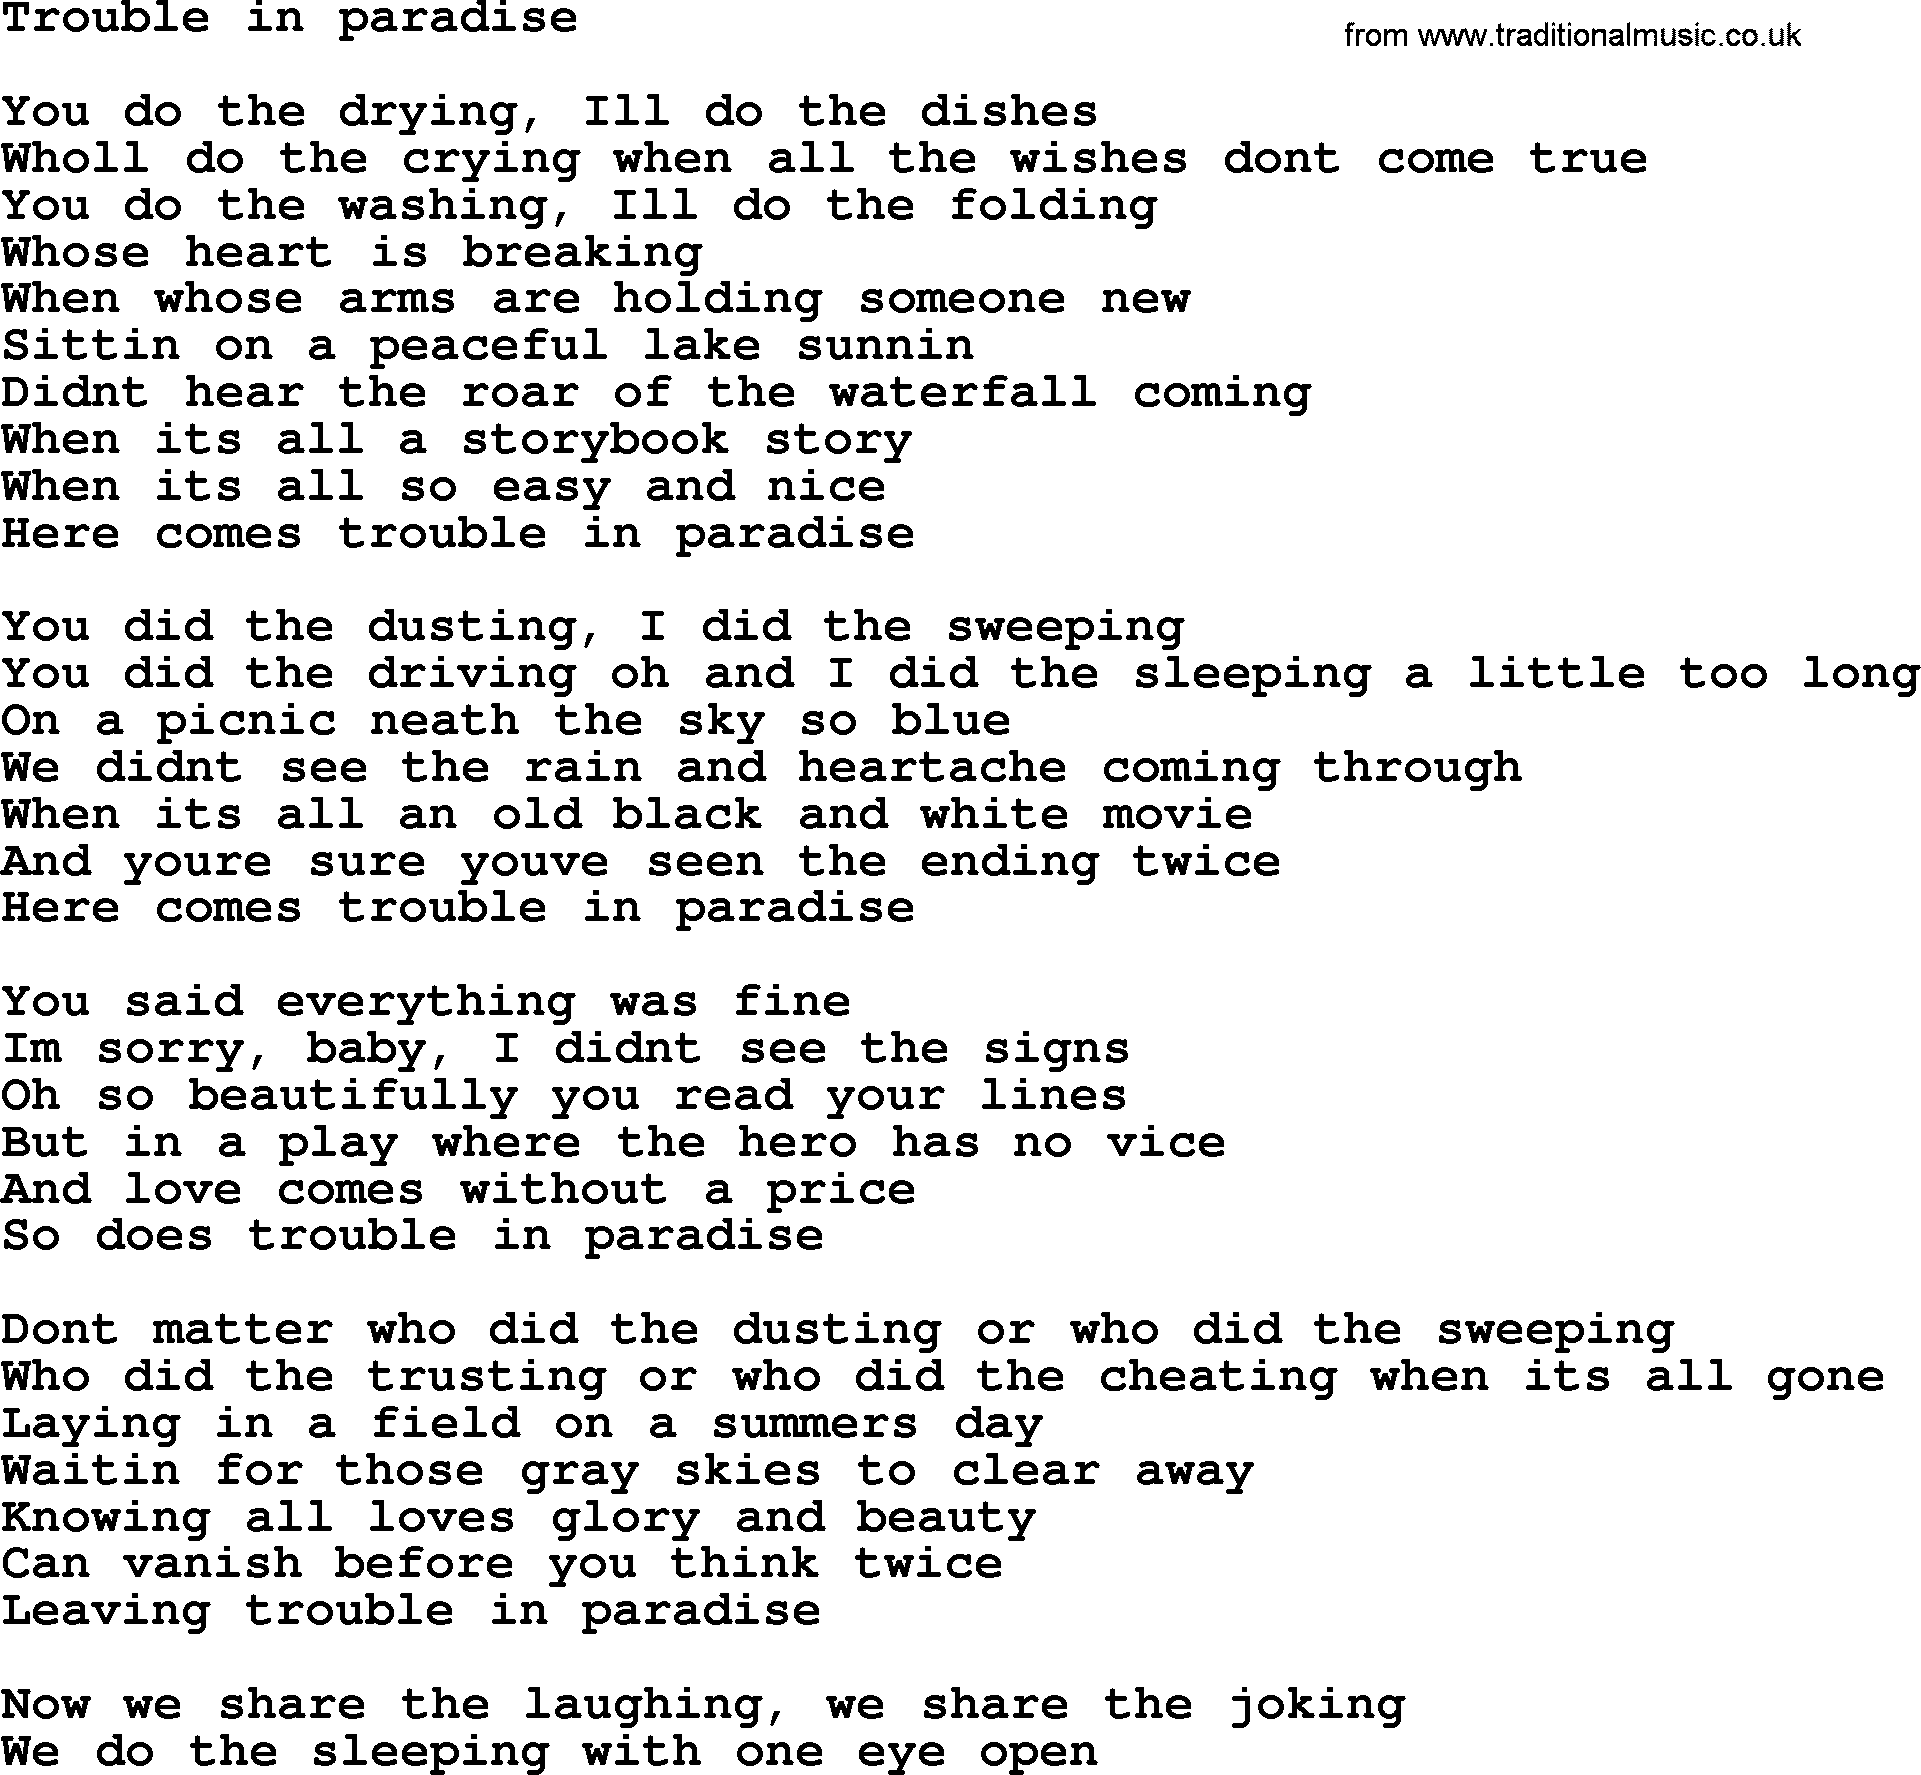 Bruce Springsteen song: Trouble In Paradise lyrics